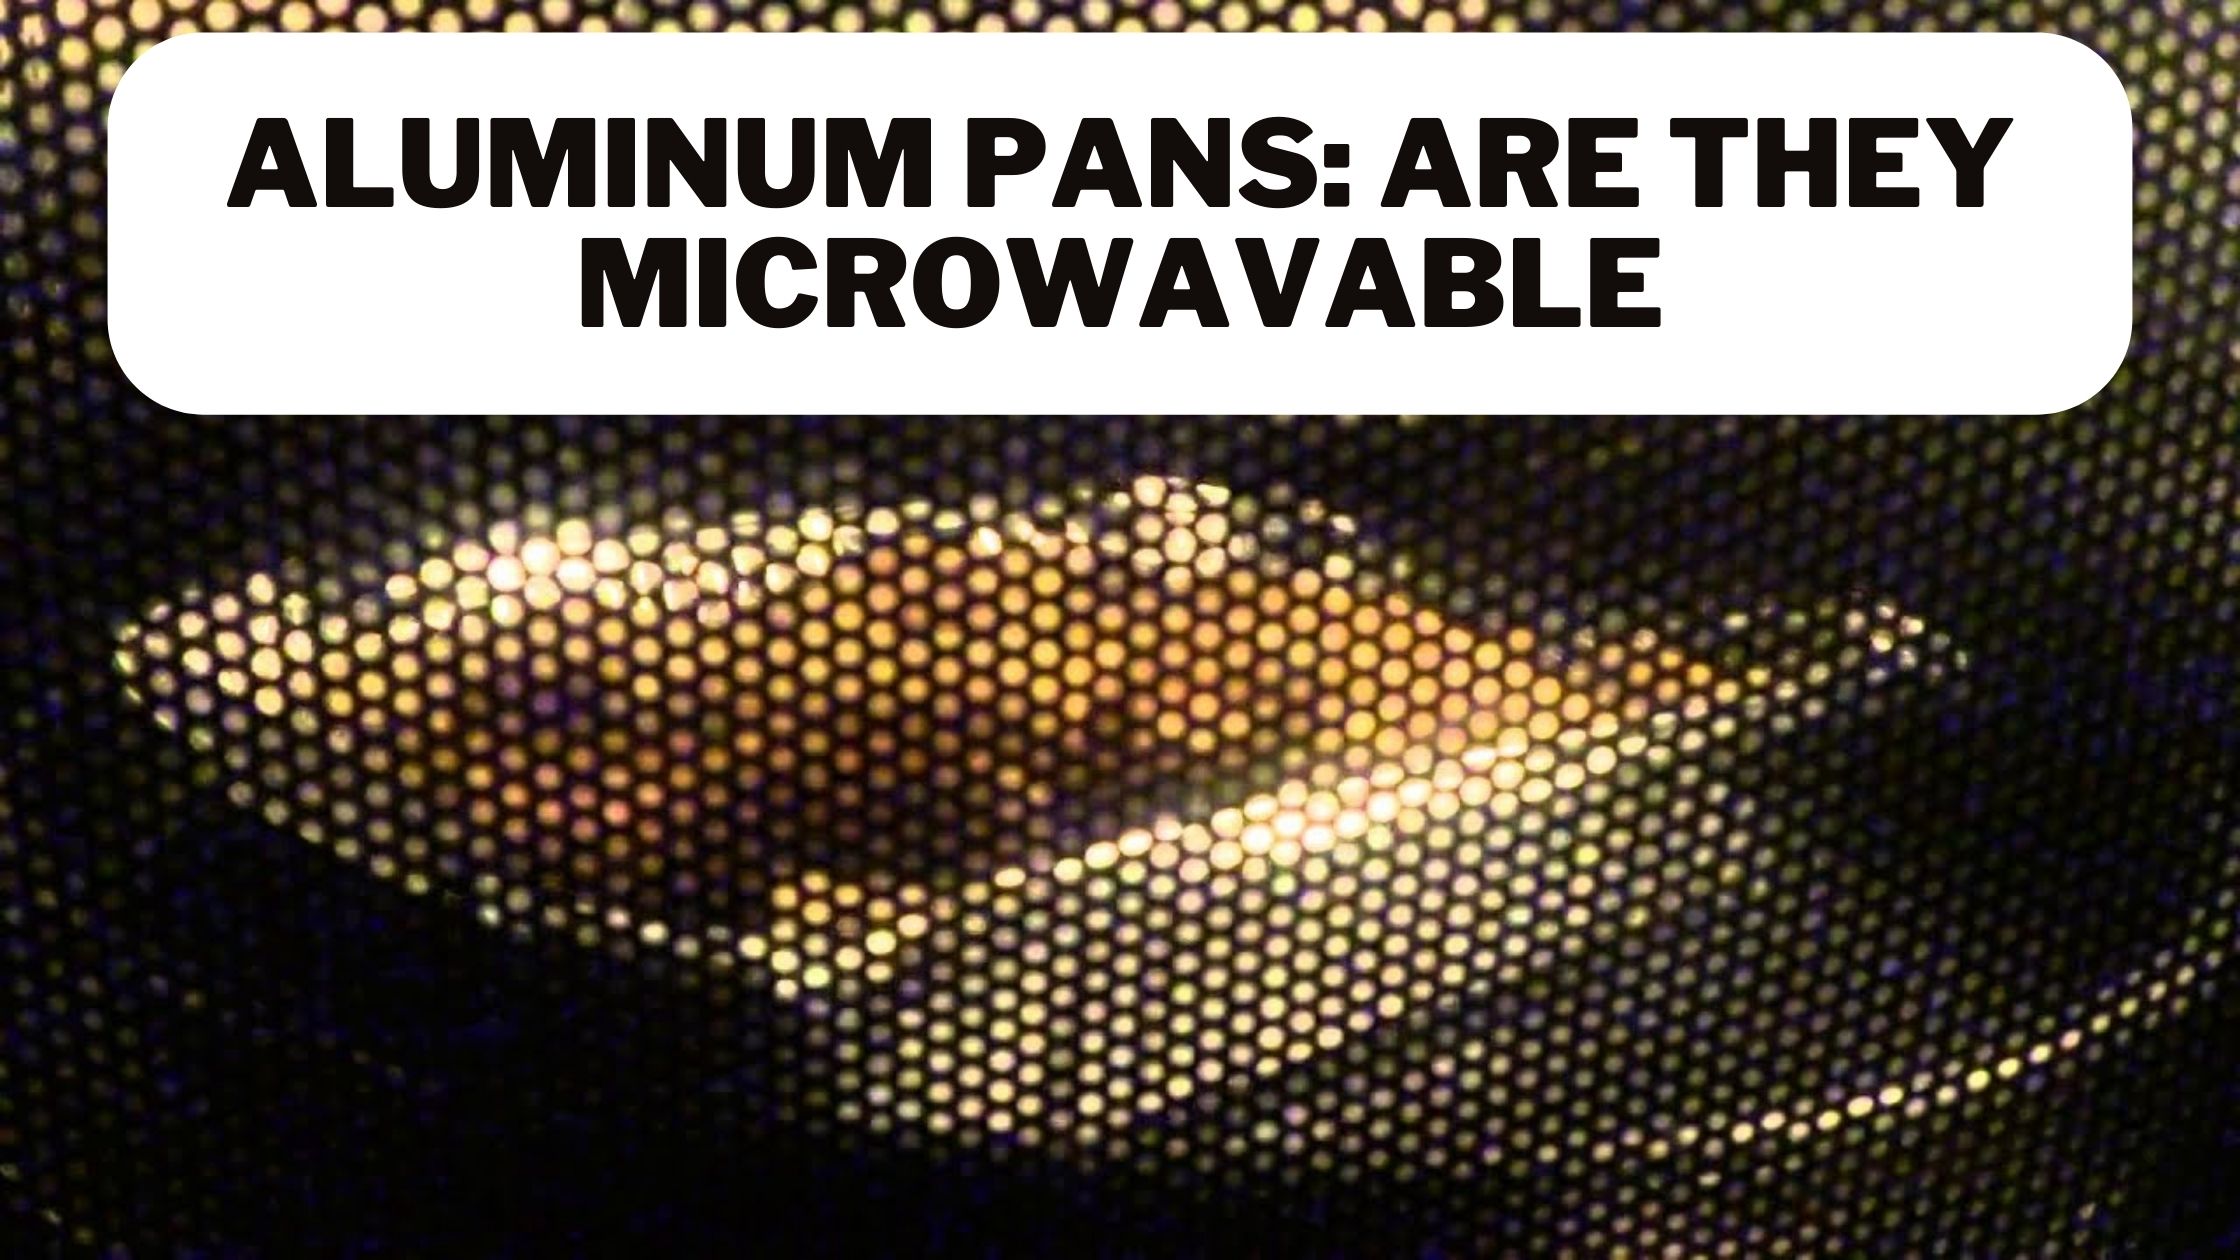 Are Aluminum Pans Microwavable